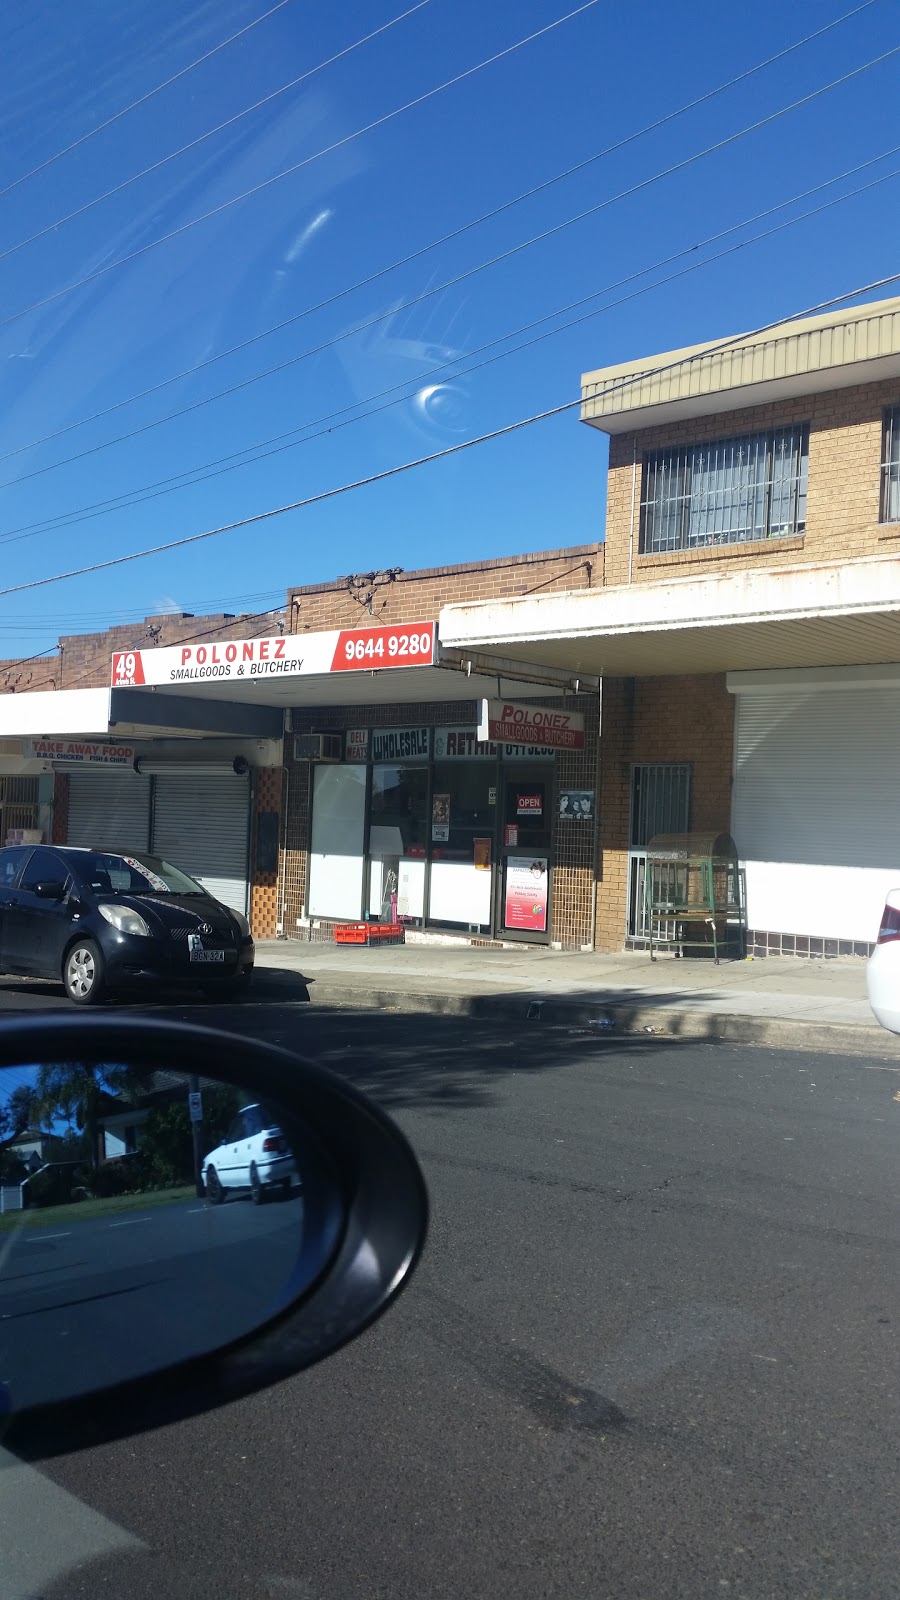 Polonez Smallgoods & Butchery | store | 49 Arlewis St, Chester Hill NSW 2162, Australia | 0296449280 OR +61 2 9644 9280